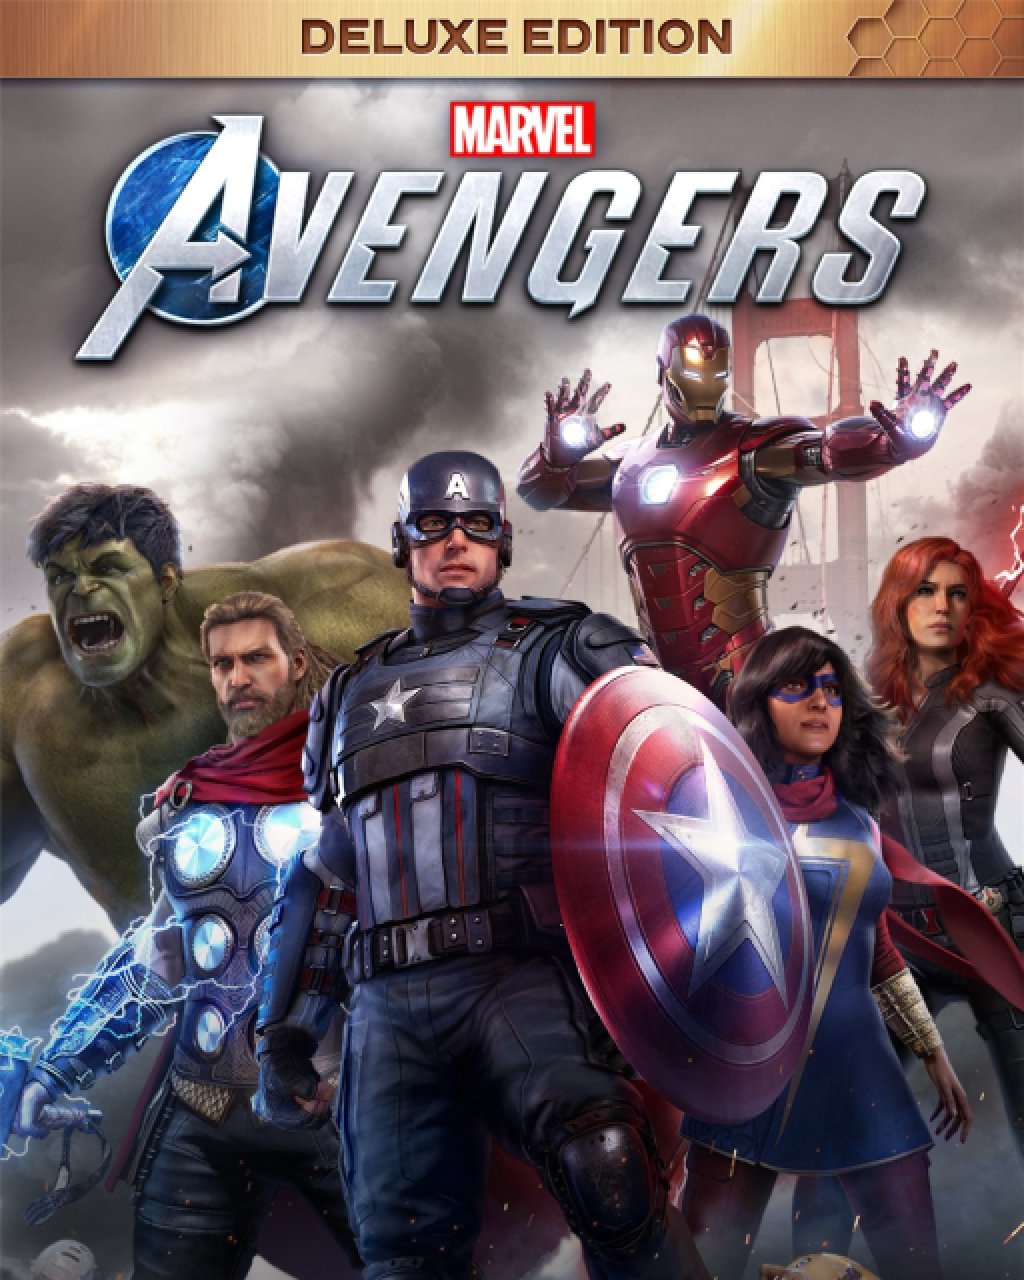 ESD Marvels Avengers Deluxe Edition